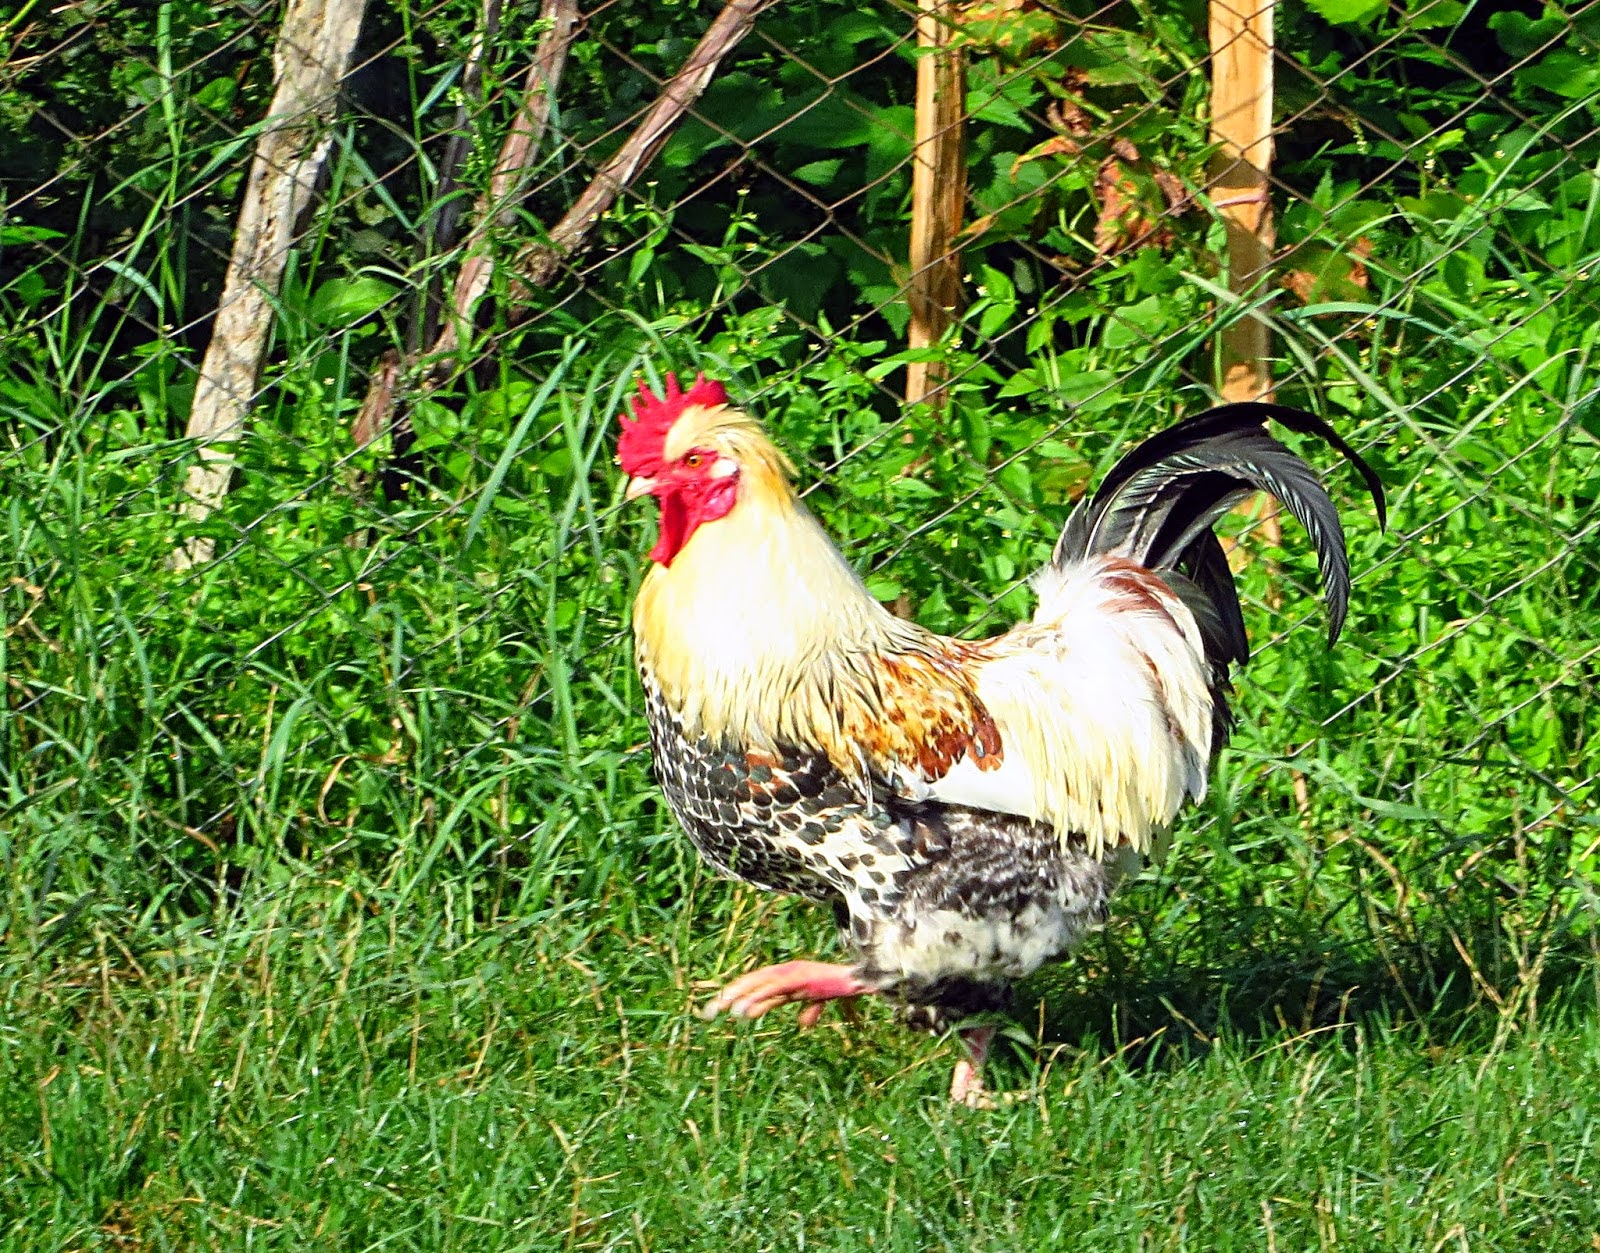 PHOTO FOR CHALLENGE 48  "Proud Rooster" - Aug 29, 2014 - OCT 13, 2014